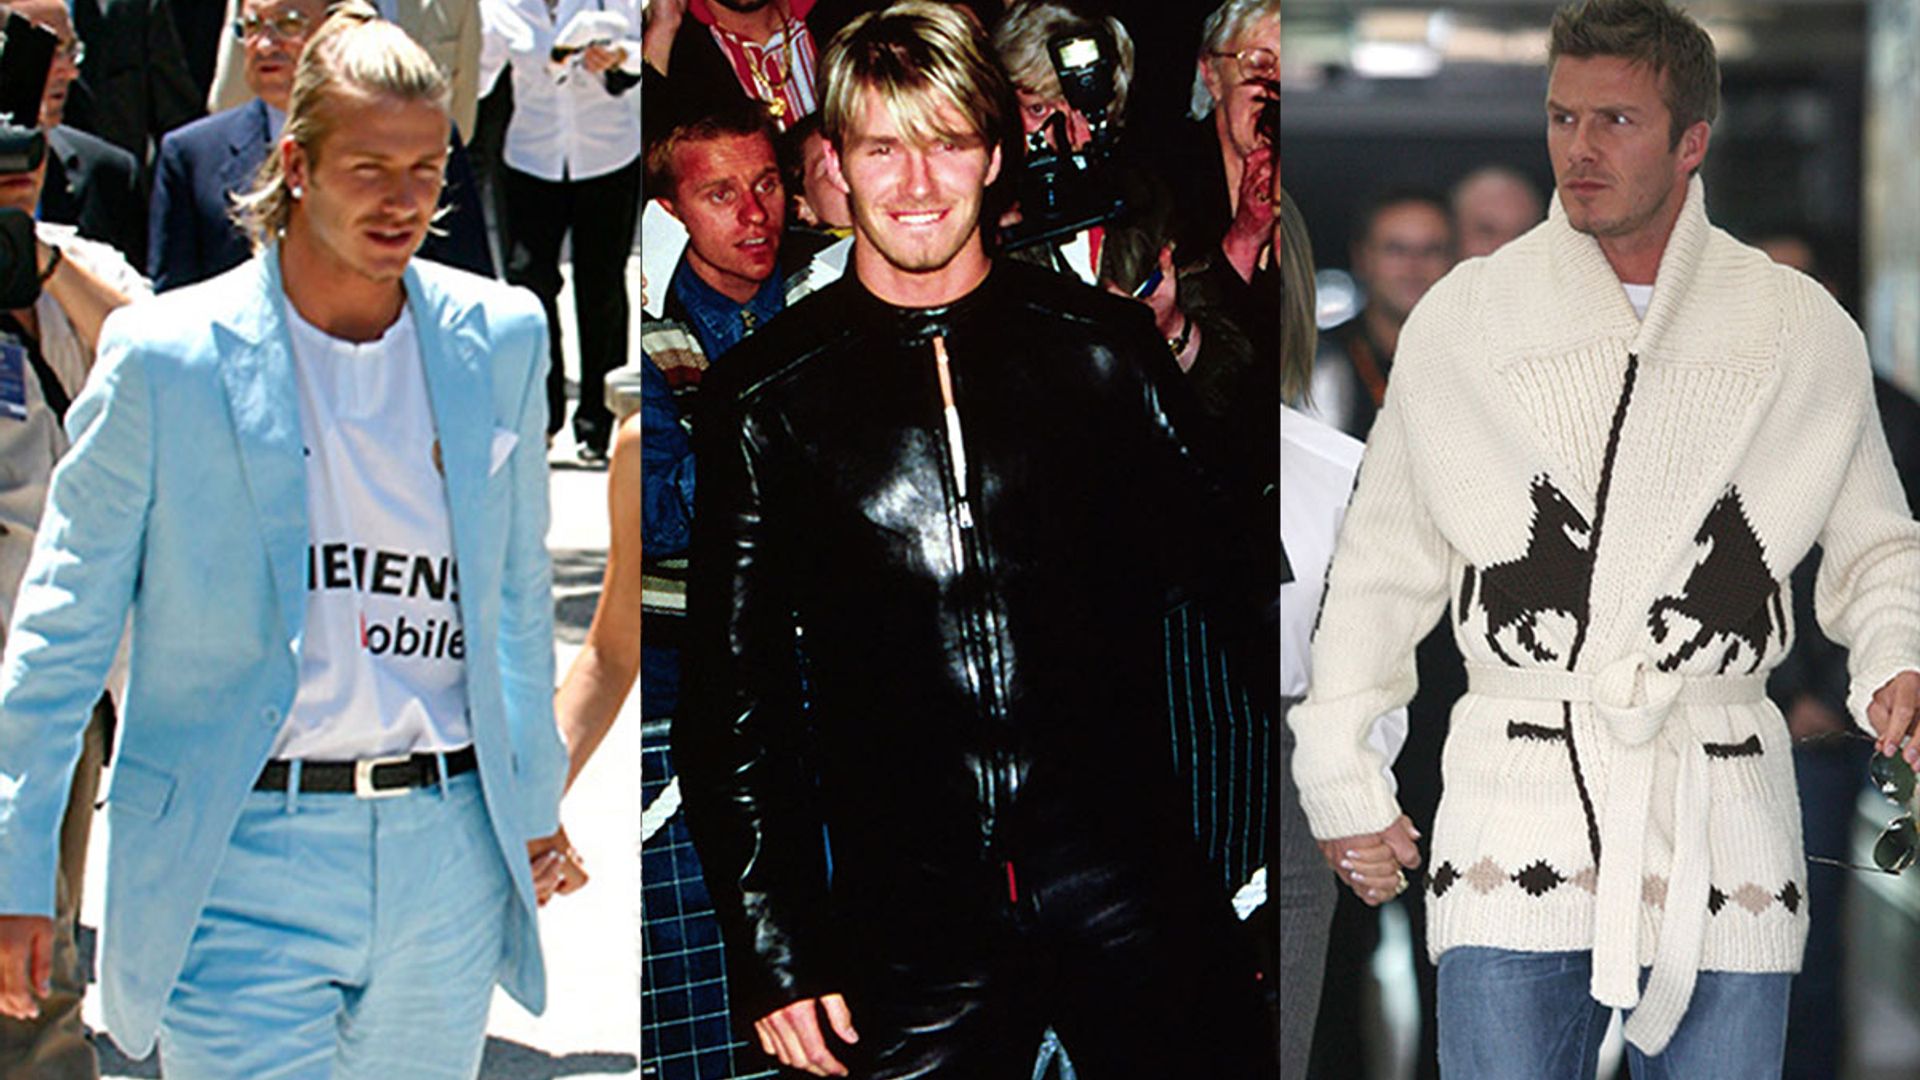 David Beckham's most outrageous outfits ever – from pastel suits